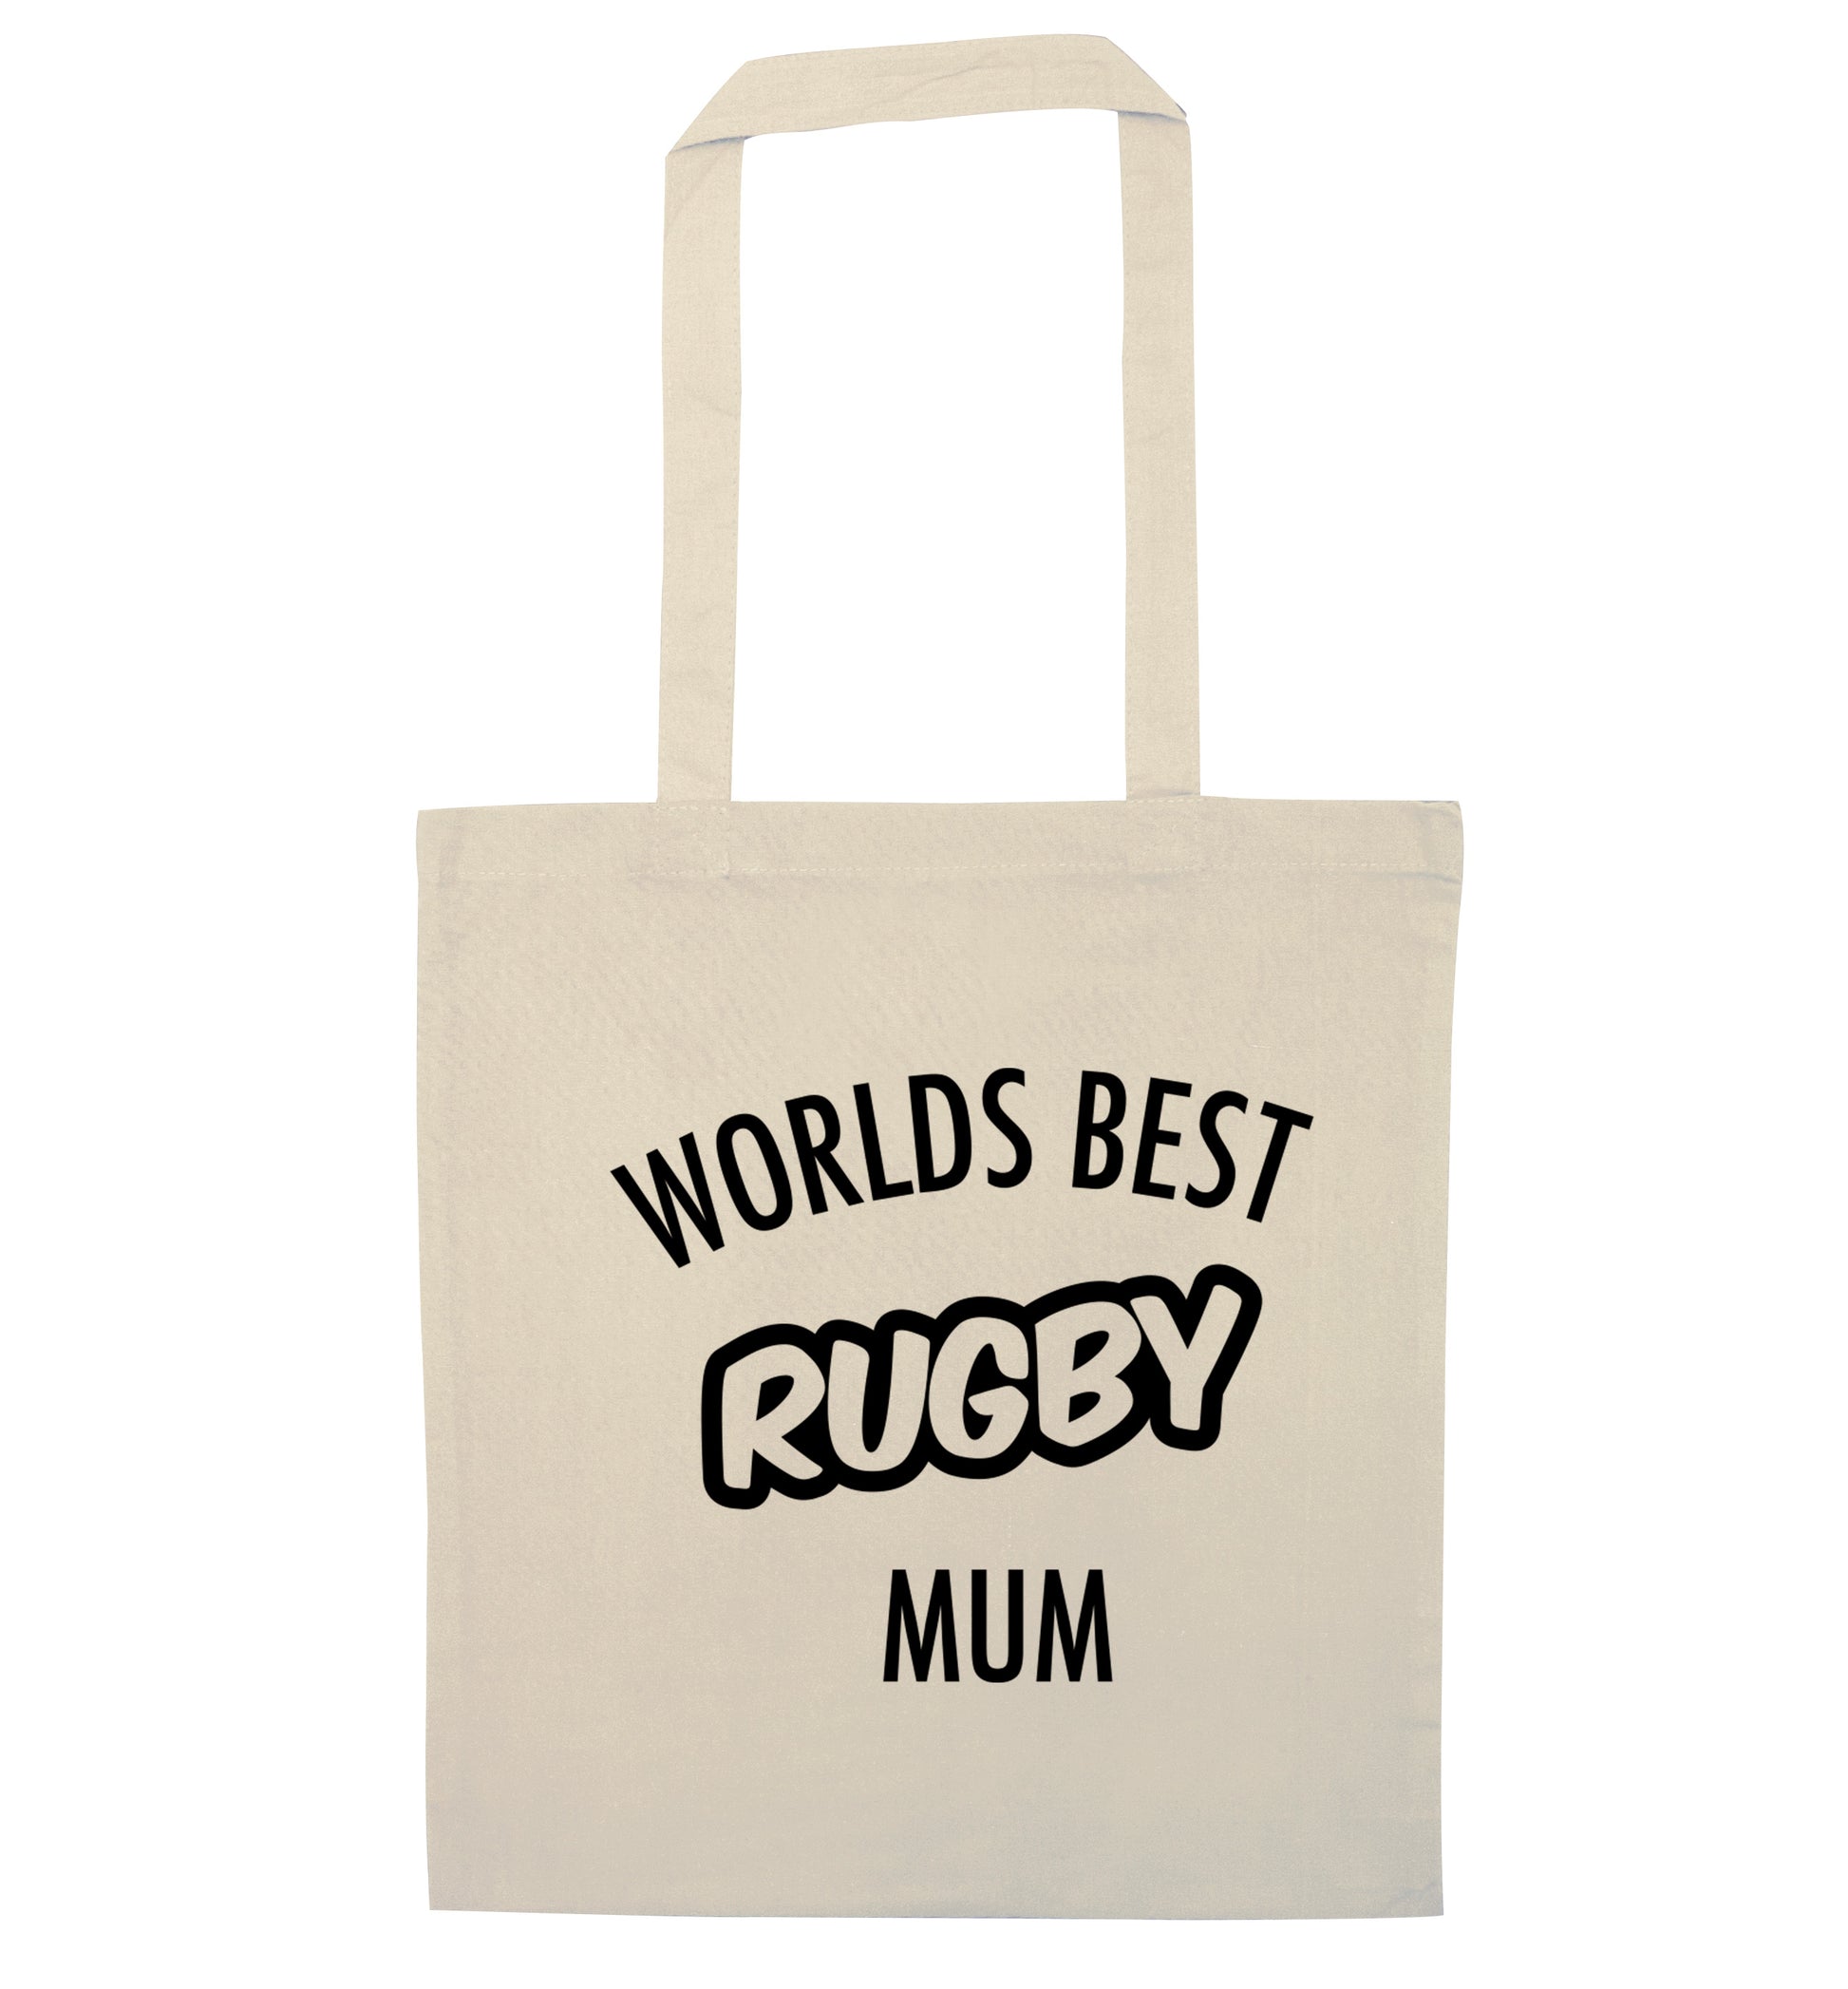 Worlds best rugby mum natural tote bag